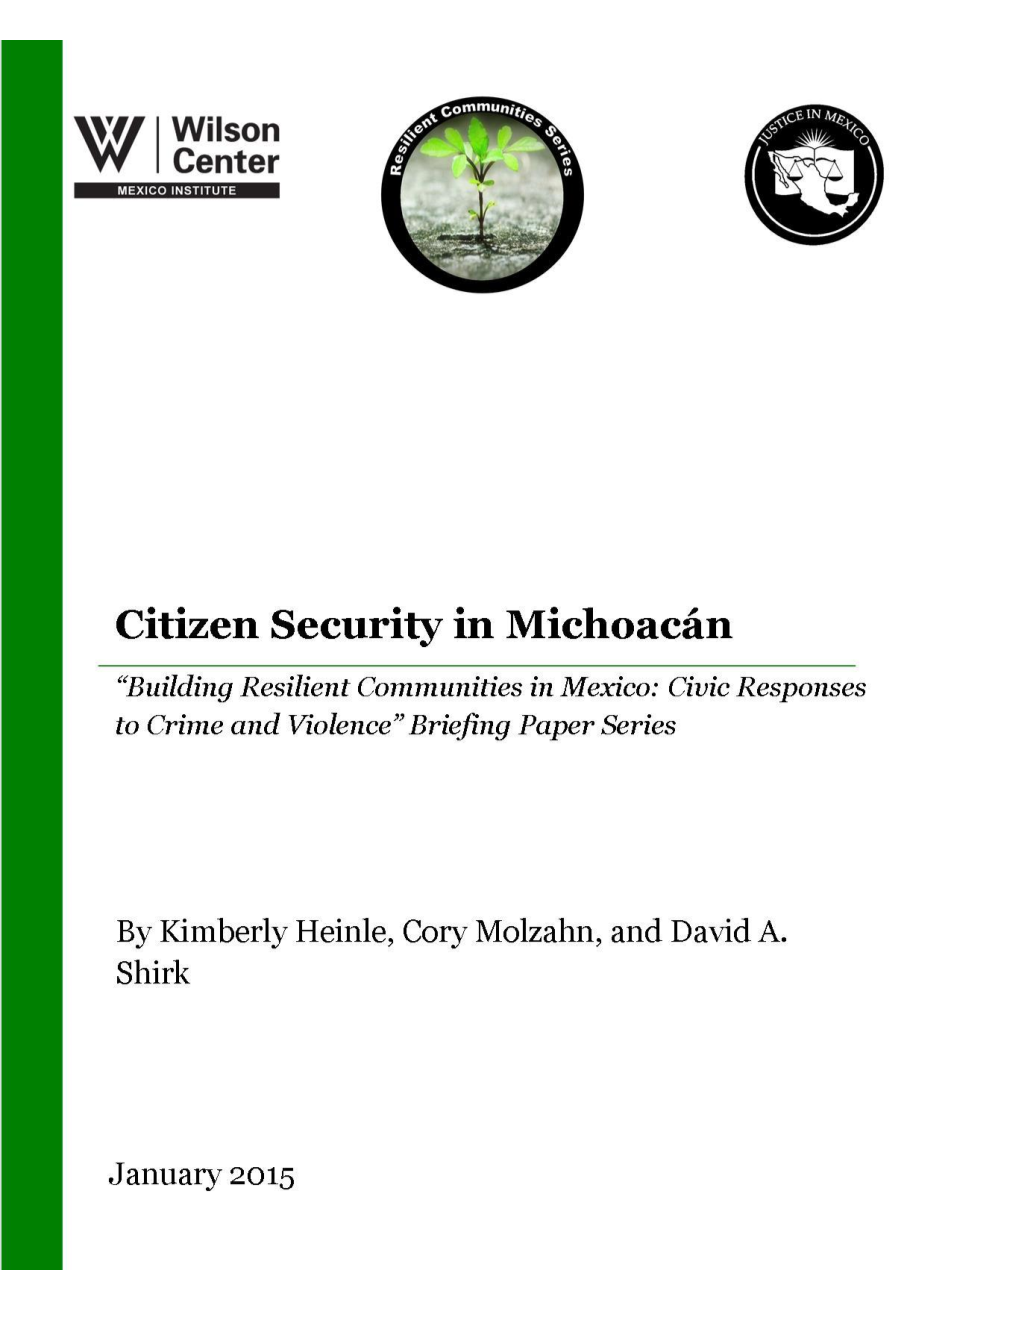 Citizen Security in Michoacán “Building Resilient Communities in Mexico: Civic Responses to Crime and Violence” Briefing Paper Series